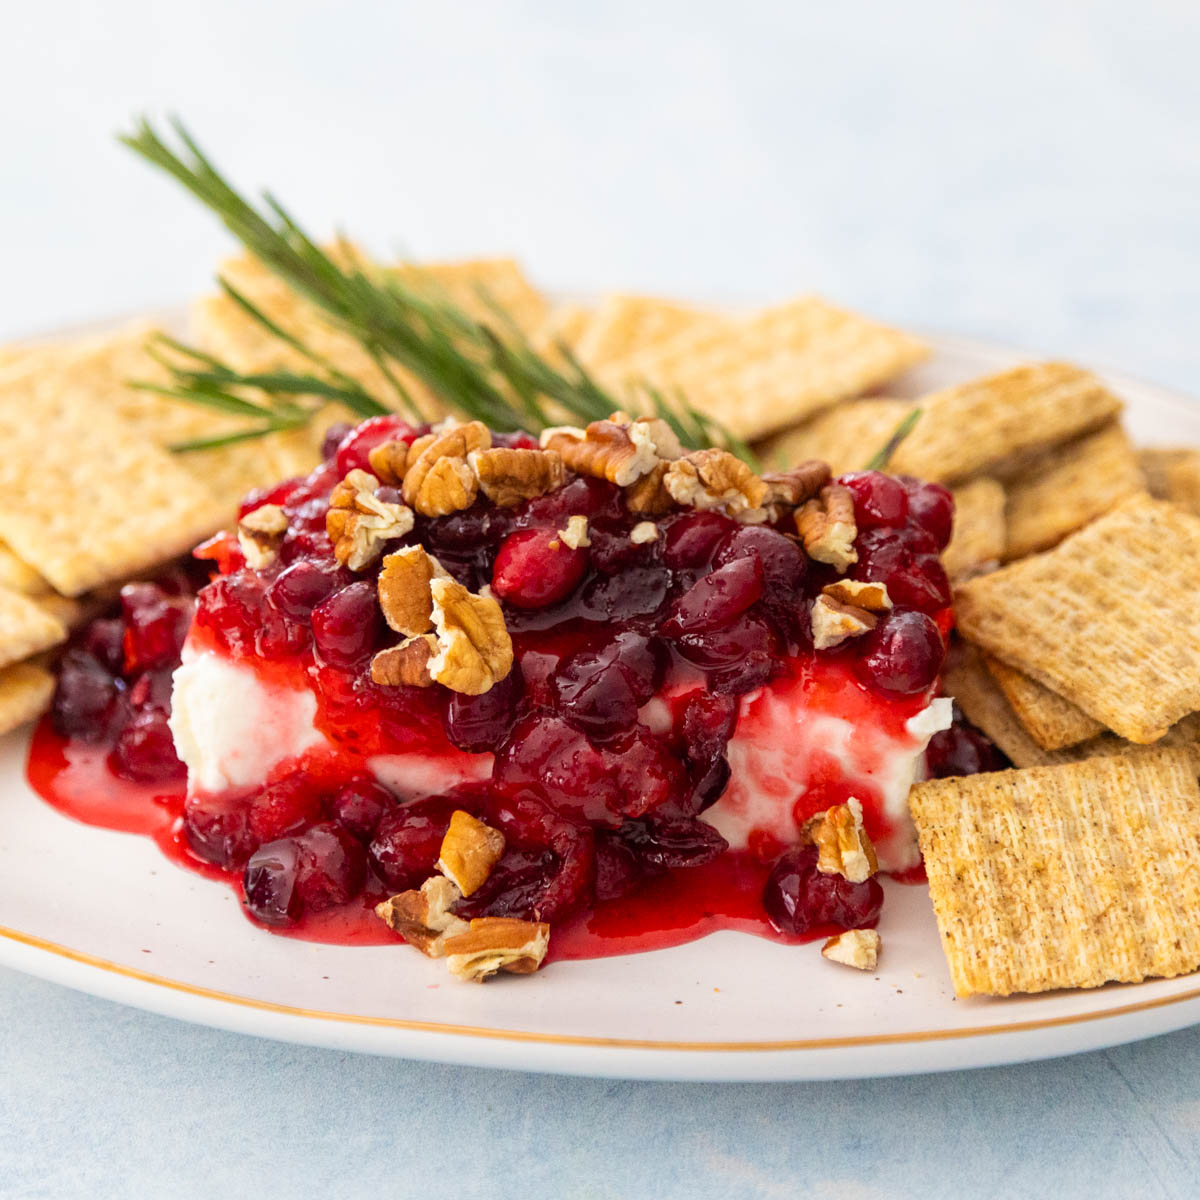 The cream cheese is on a platter with crackers. The cranberry sauce has been spooned over the top. Pecans have been sprinkled over.